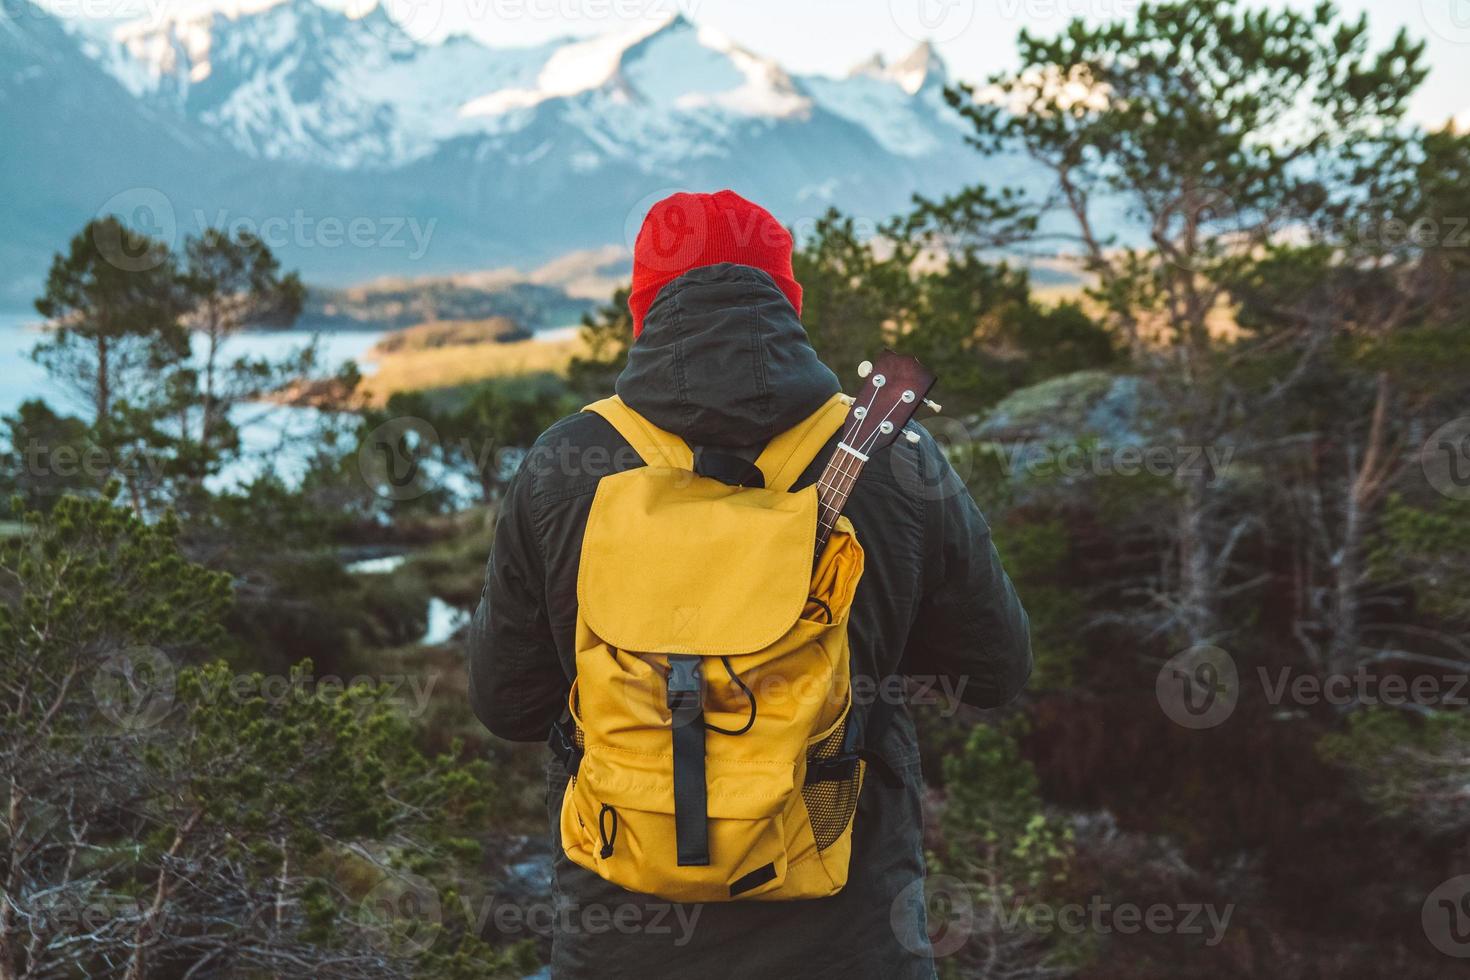 Traveler man is standing in the middle of a forest with a guitar on background of mountains and lake. Wearing a yellow backpack in a red hat. Place for text or advertising. Shoot from the back photo